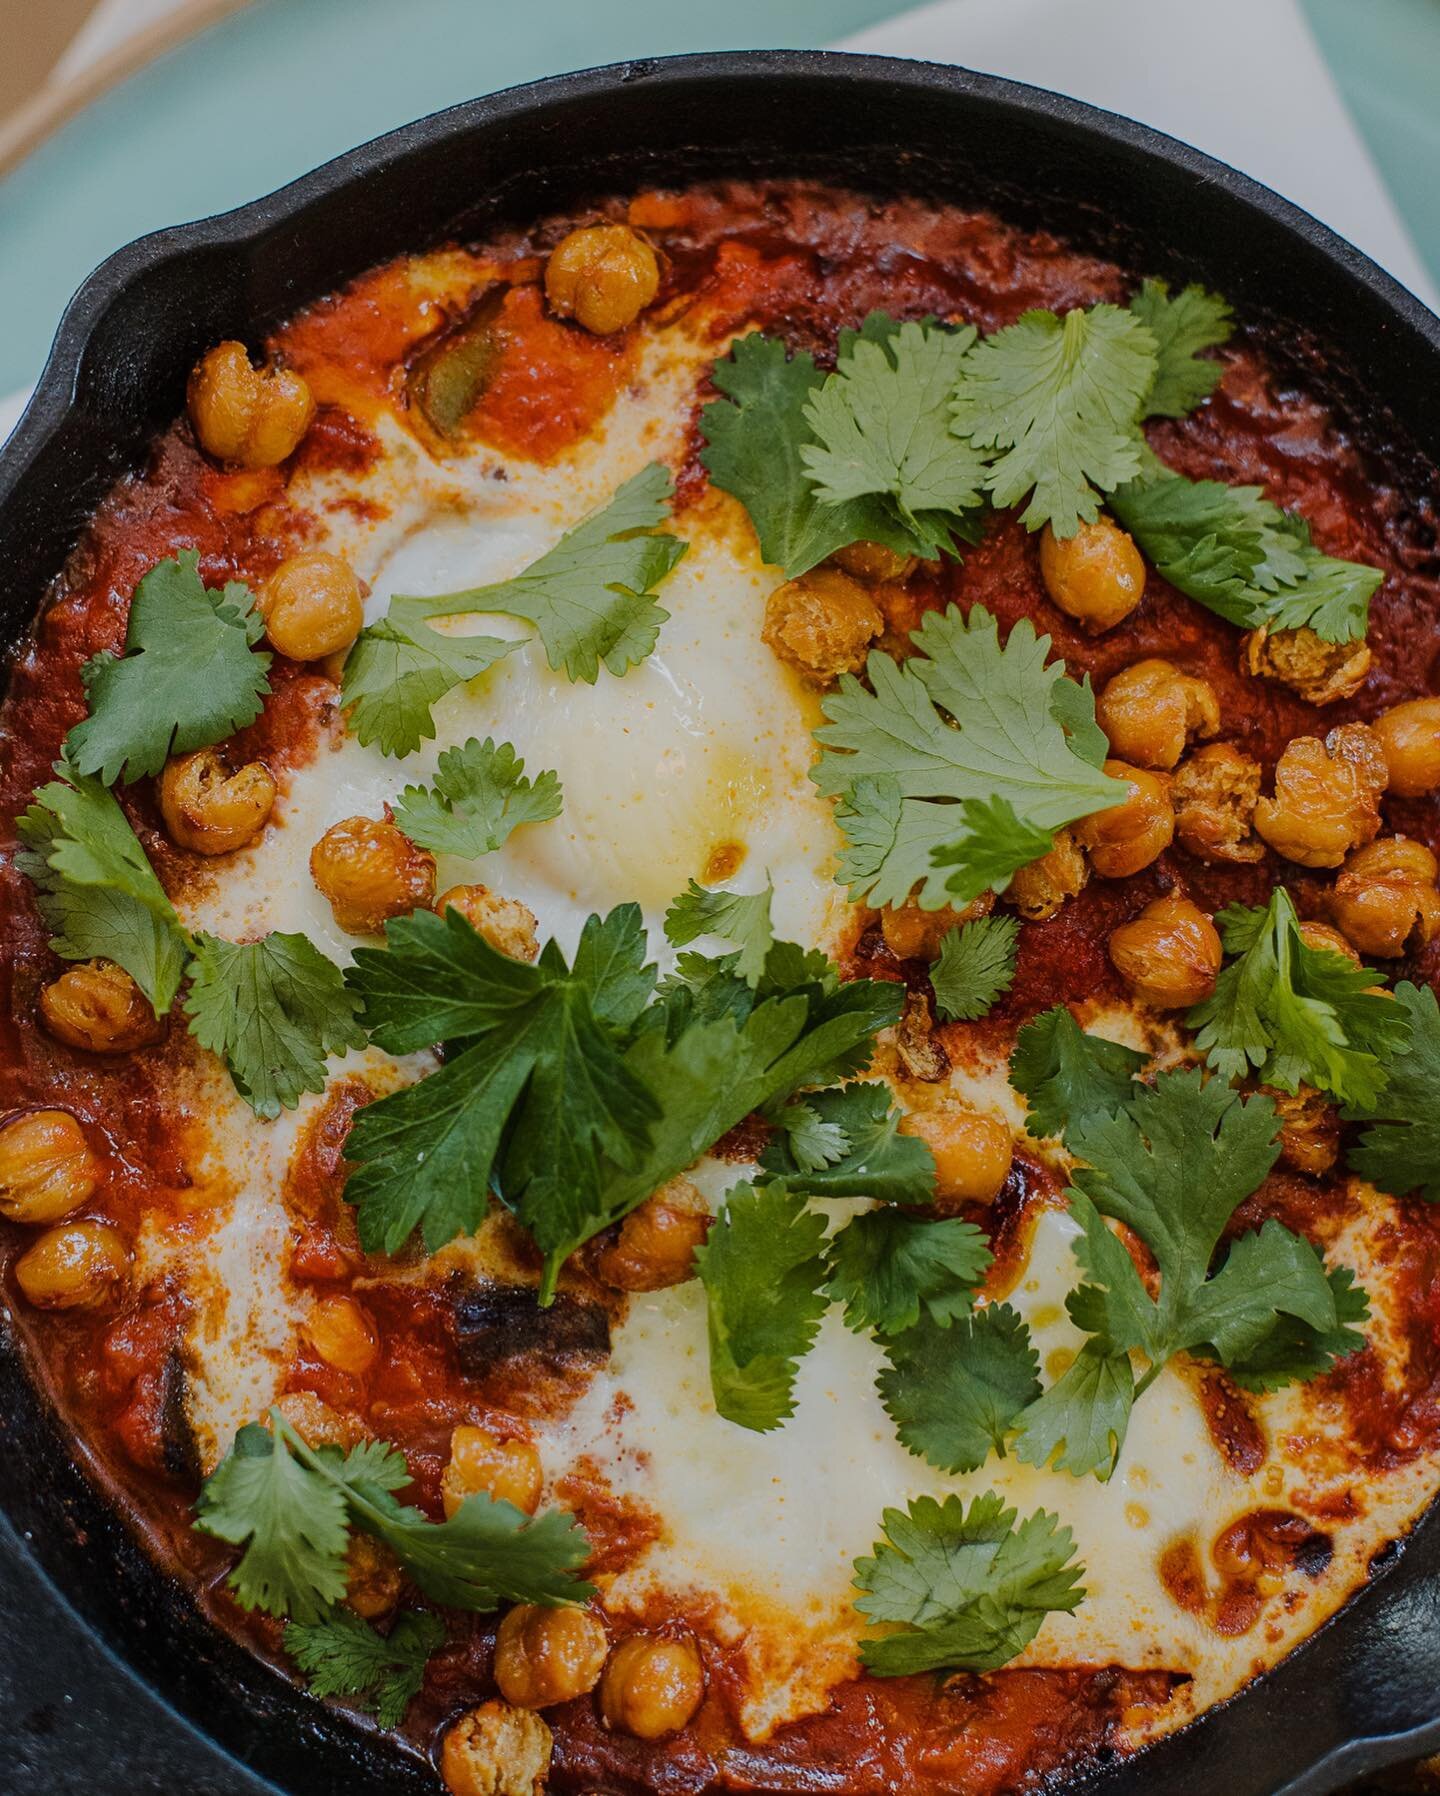 Just in time for your brunch needs today we&rsquo;re bringing back a crowd favorite
SHAKSHUKA.

SHAKSHUKA.
Roasted Eggplant, carrots, onions, garlic and jalape&ntilde;os, spicy tomato sauce, fried chickpeas, naan bread. Vegetarian or add eggs